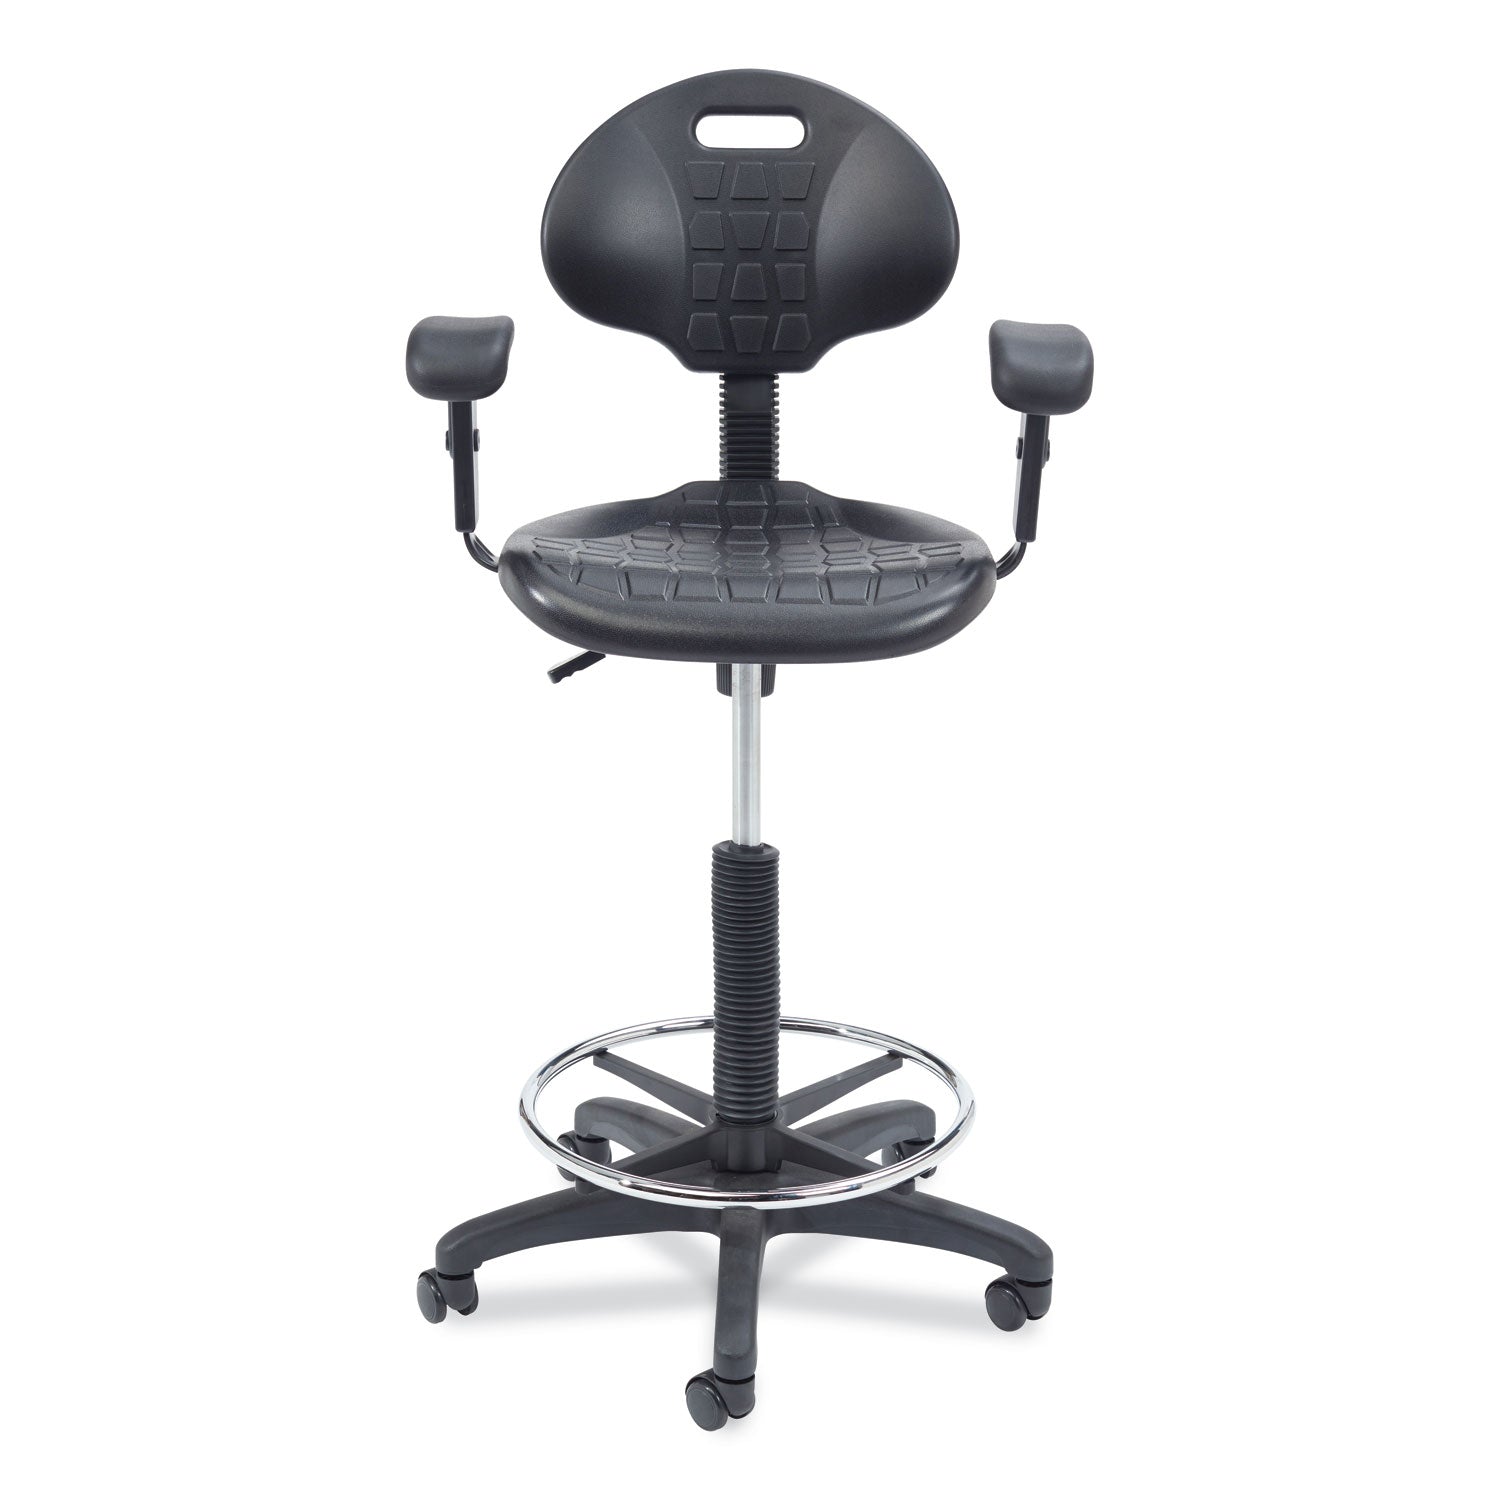 6700-series-polyurethane-adj-height-task-chair-w-arms-supports-300lb-22-32-seat-ht-black-seat-baseships-in-1-3-bus-days_nps6722hba - 2